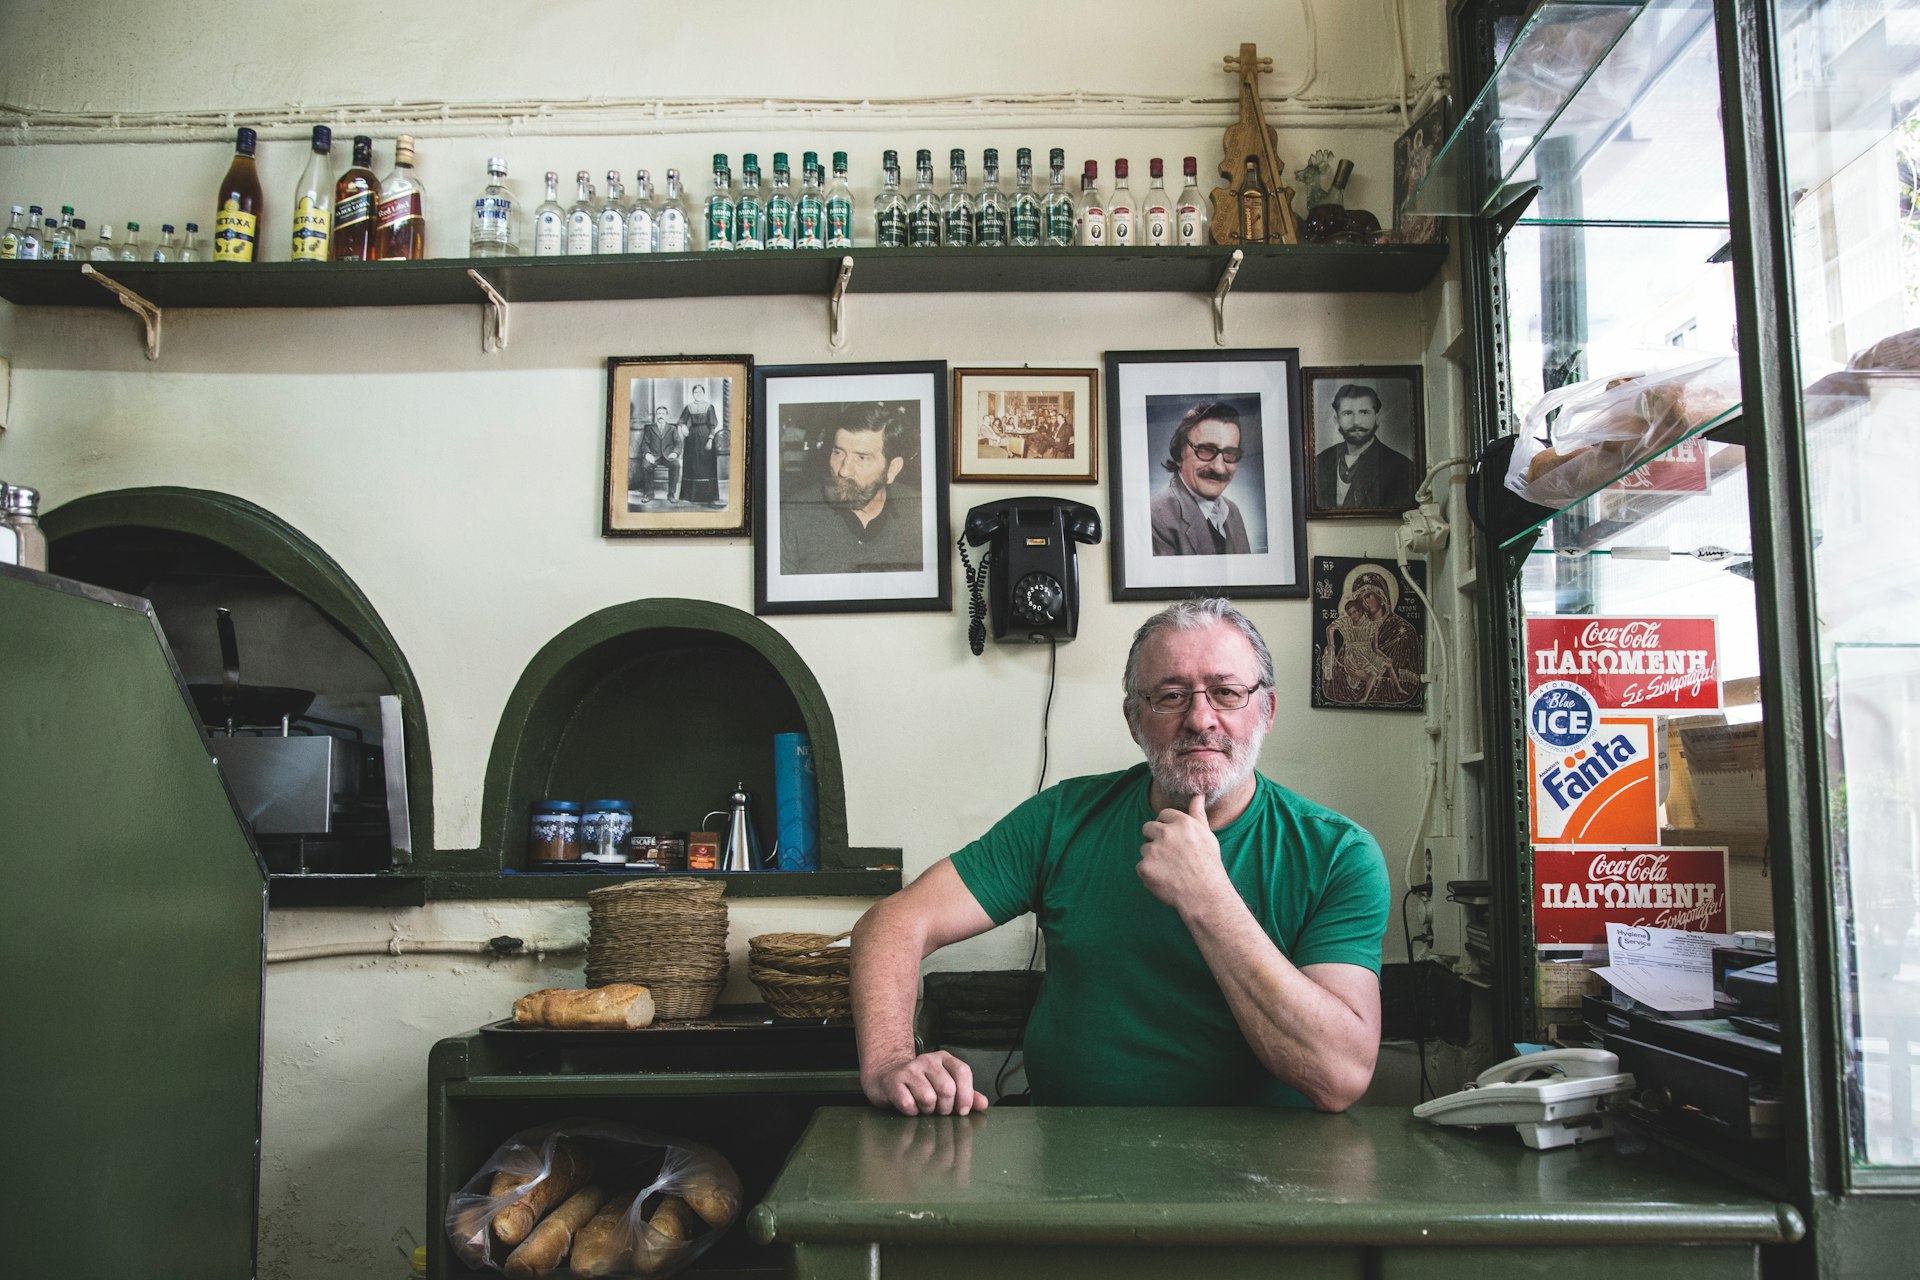 The proprietor of Kapetan Mixalis sits in a green shirt and glasses at the table of his Cretan-style taverna. Behind him are portraits of men with mid-century glasses and dramatic mustaches, as well as a vintage phone. Above on a high shelf are bottles of scotch and ouzo 